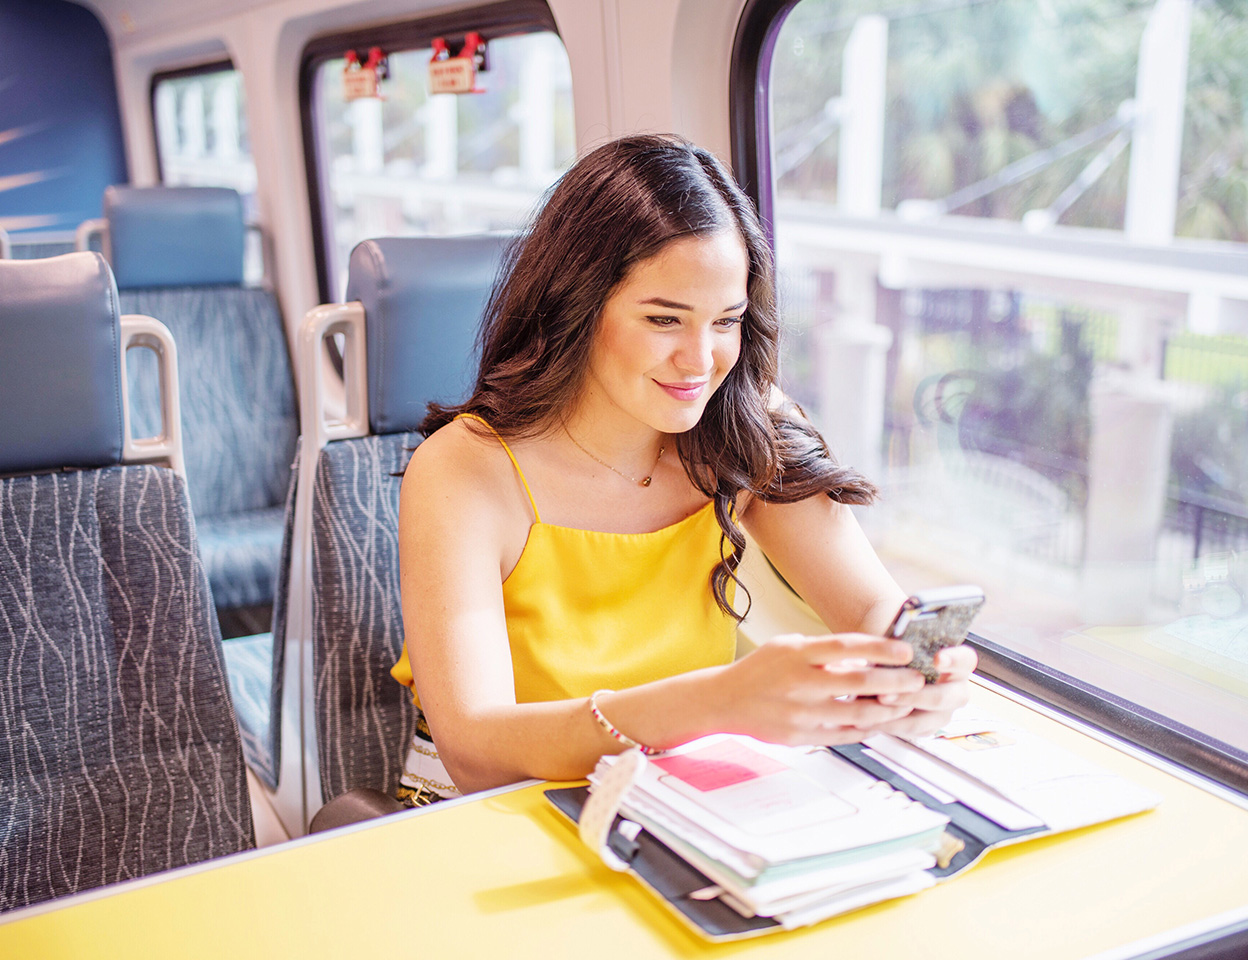 Young woman riding SunRail looking at phone and working in day planner.